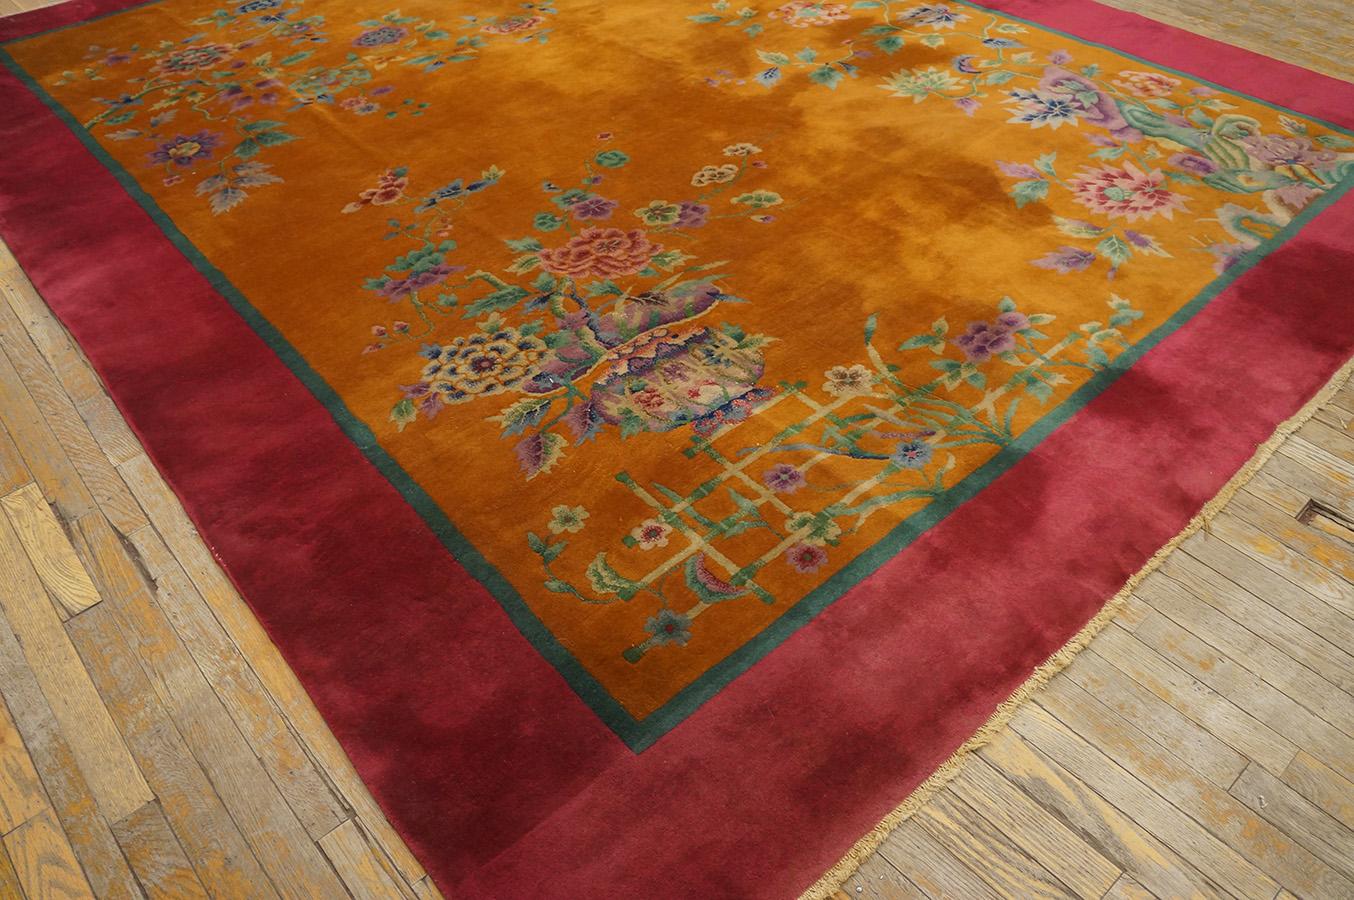 1920s Chinese Art Deco Carpet ( 8'8'' x 11'4'' - 265 x 345 ) For Sale 4